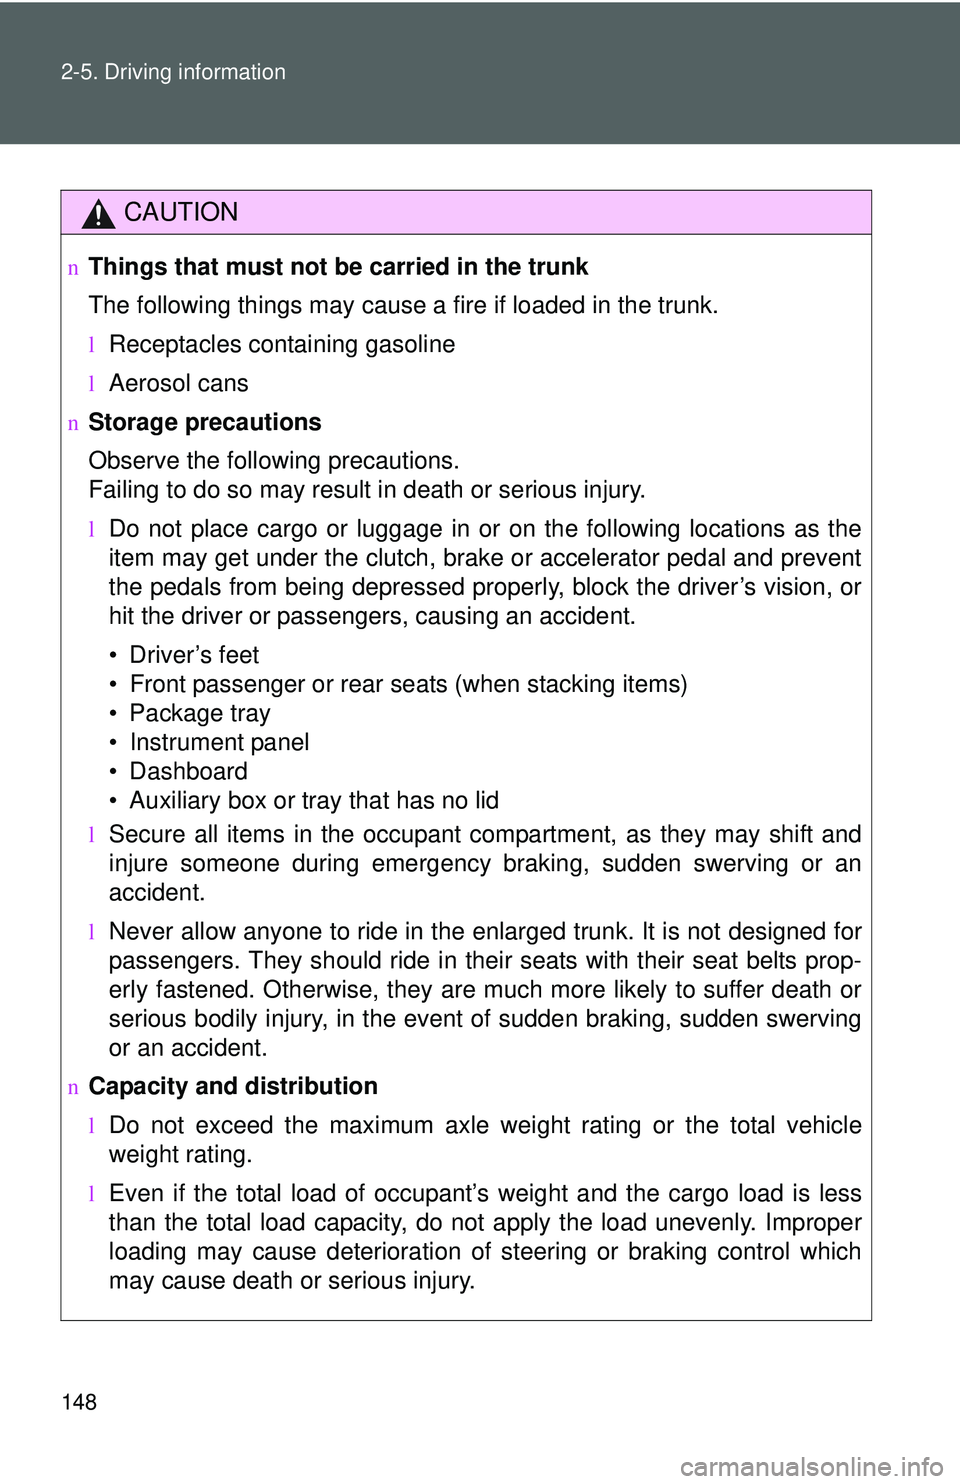 TOYOTA YARIS SEDAN 2011  Owners Manual 148 2-5. Driving information
CAUTION
nThings that must not be carried in the trunk
The following things may cause a fire if loaded in the trunk.
lReceptacles containing gasoline
lAerosol cans
nStorage